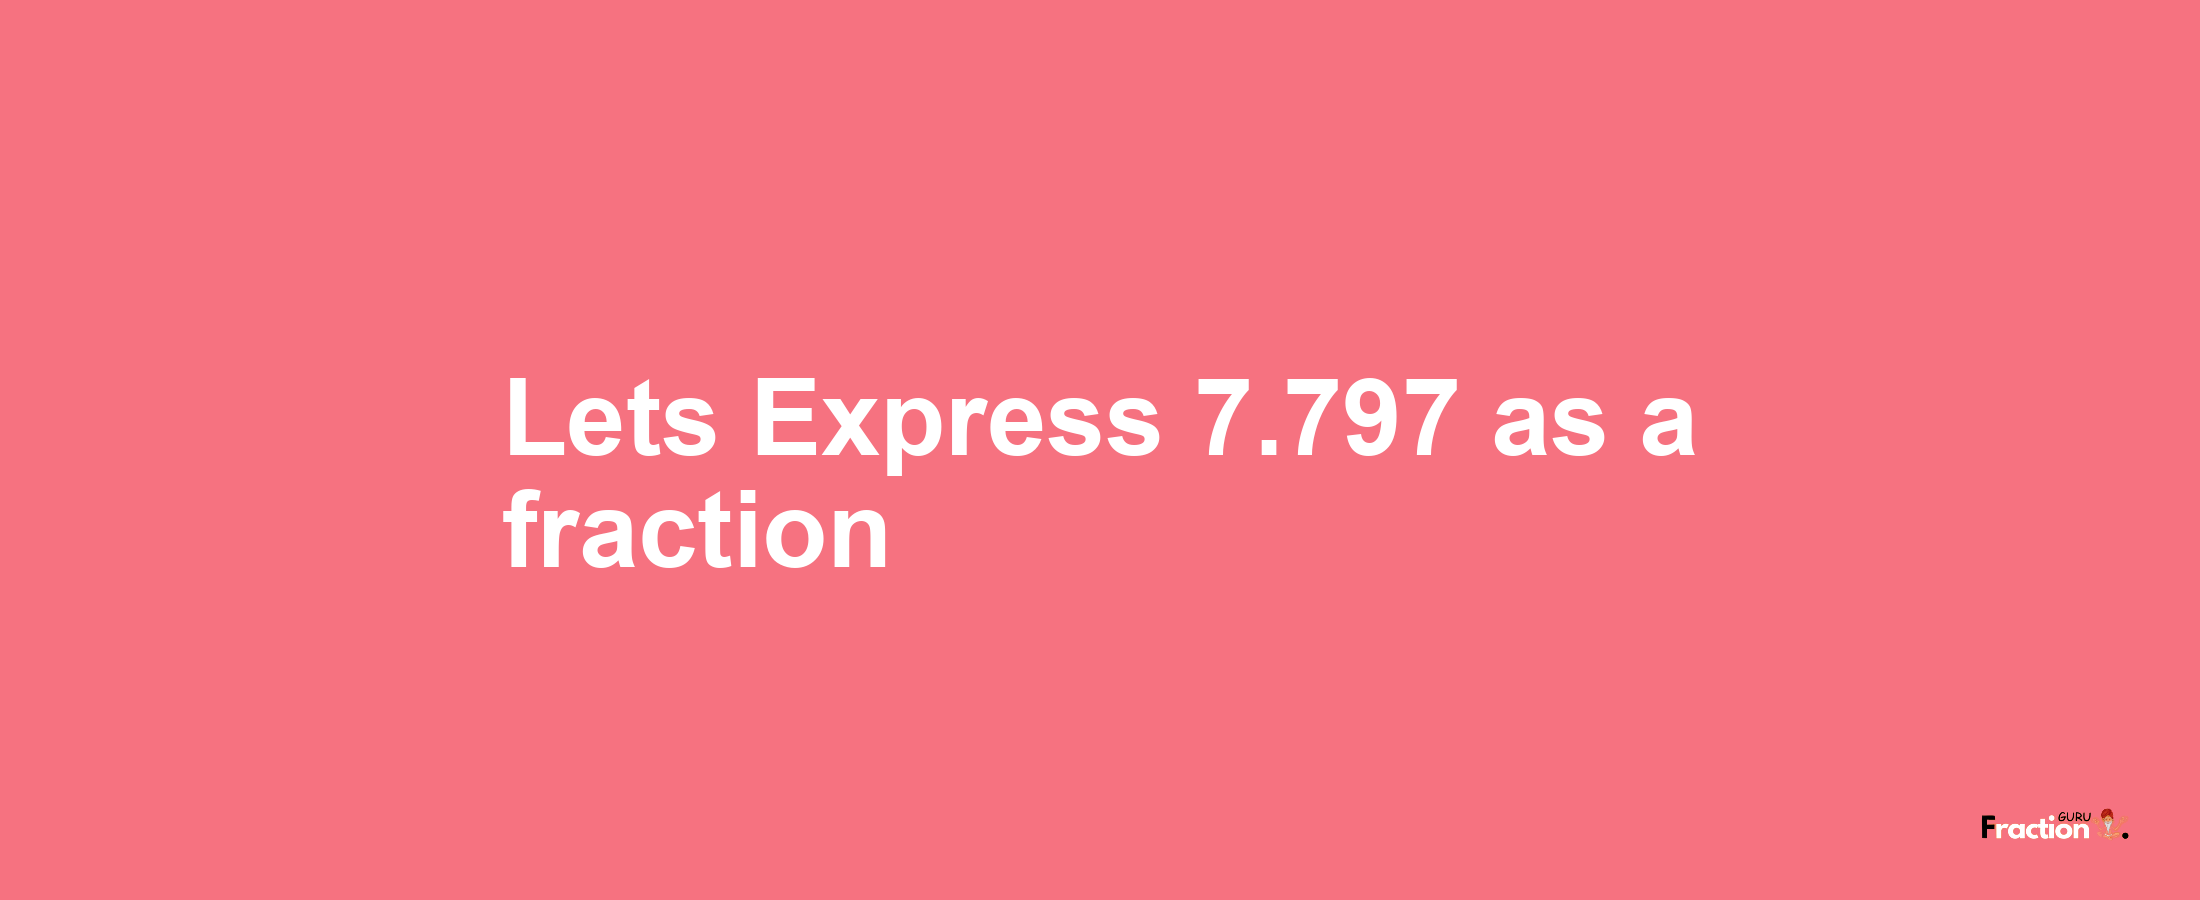 Lets Express 7.797 as afraction